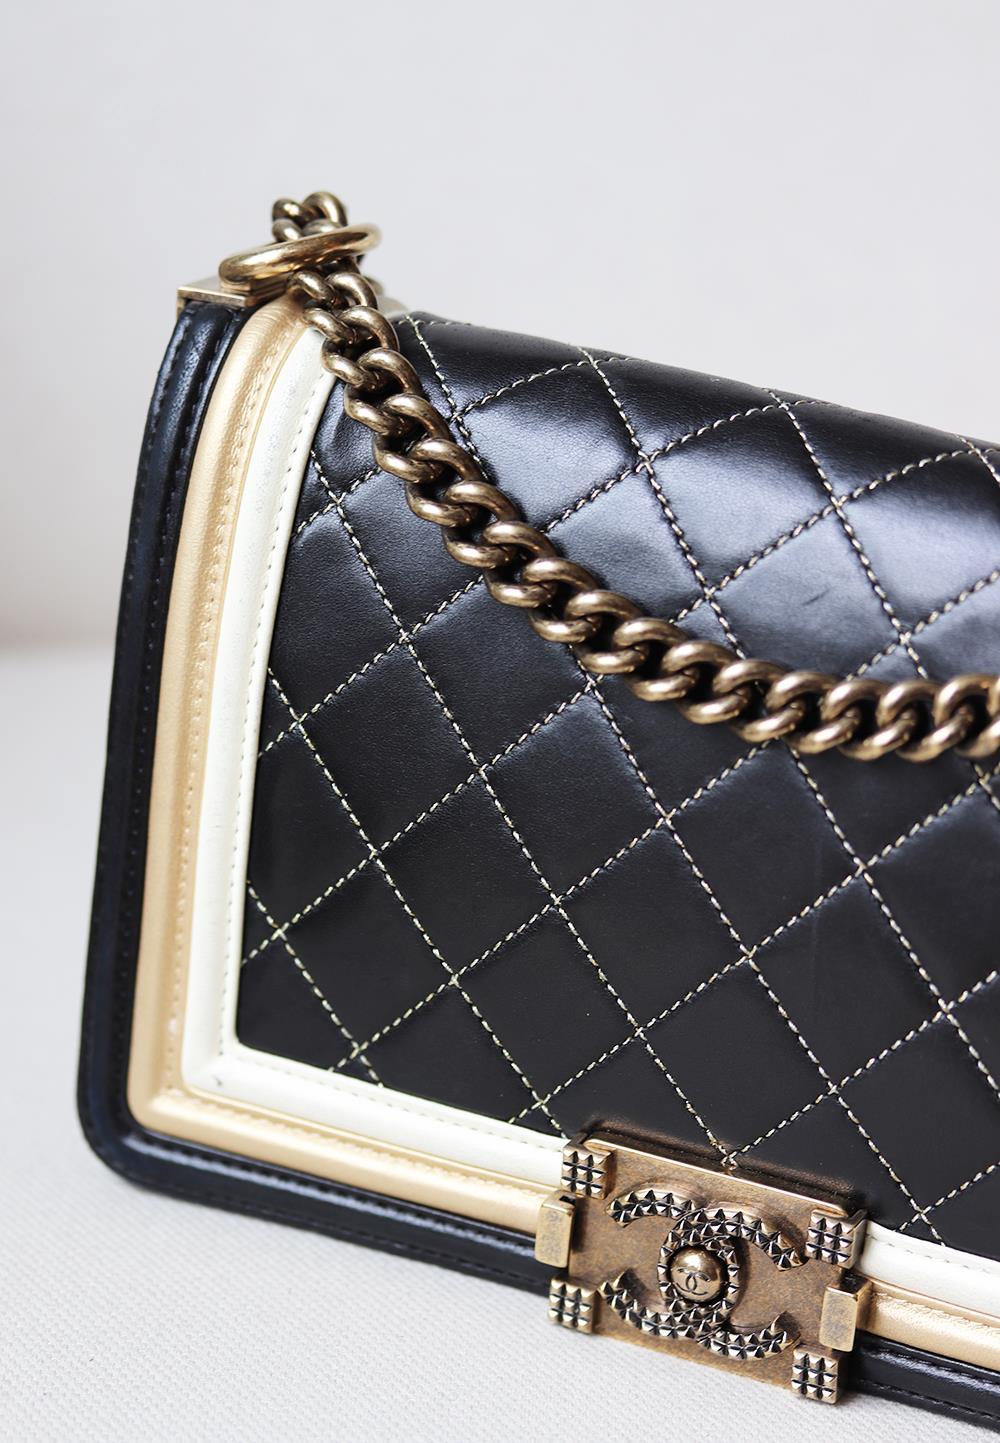 Chanel Metallic Quilted Lambskin Leather Boy Flap Bag has been hand-finished by skilled artisans in the label's workshop.
Boasting soft black, gold and ivory lambskin-leather exterior, this design is accented with gold-toned and black